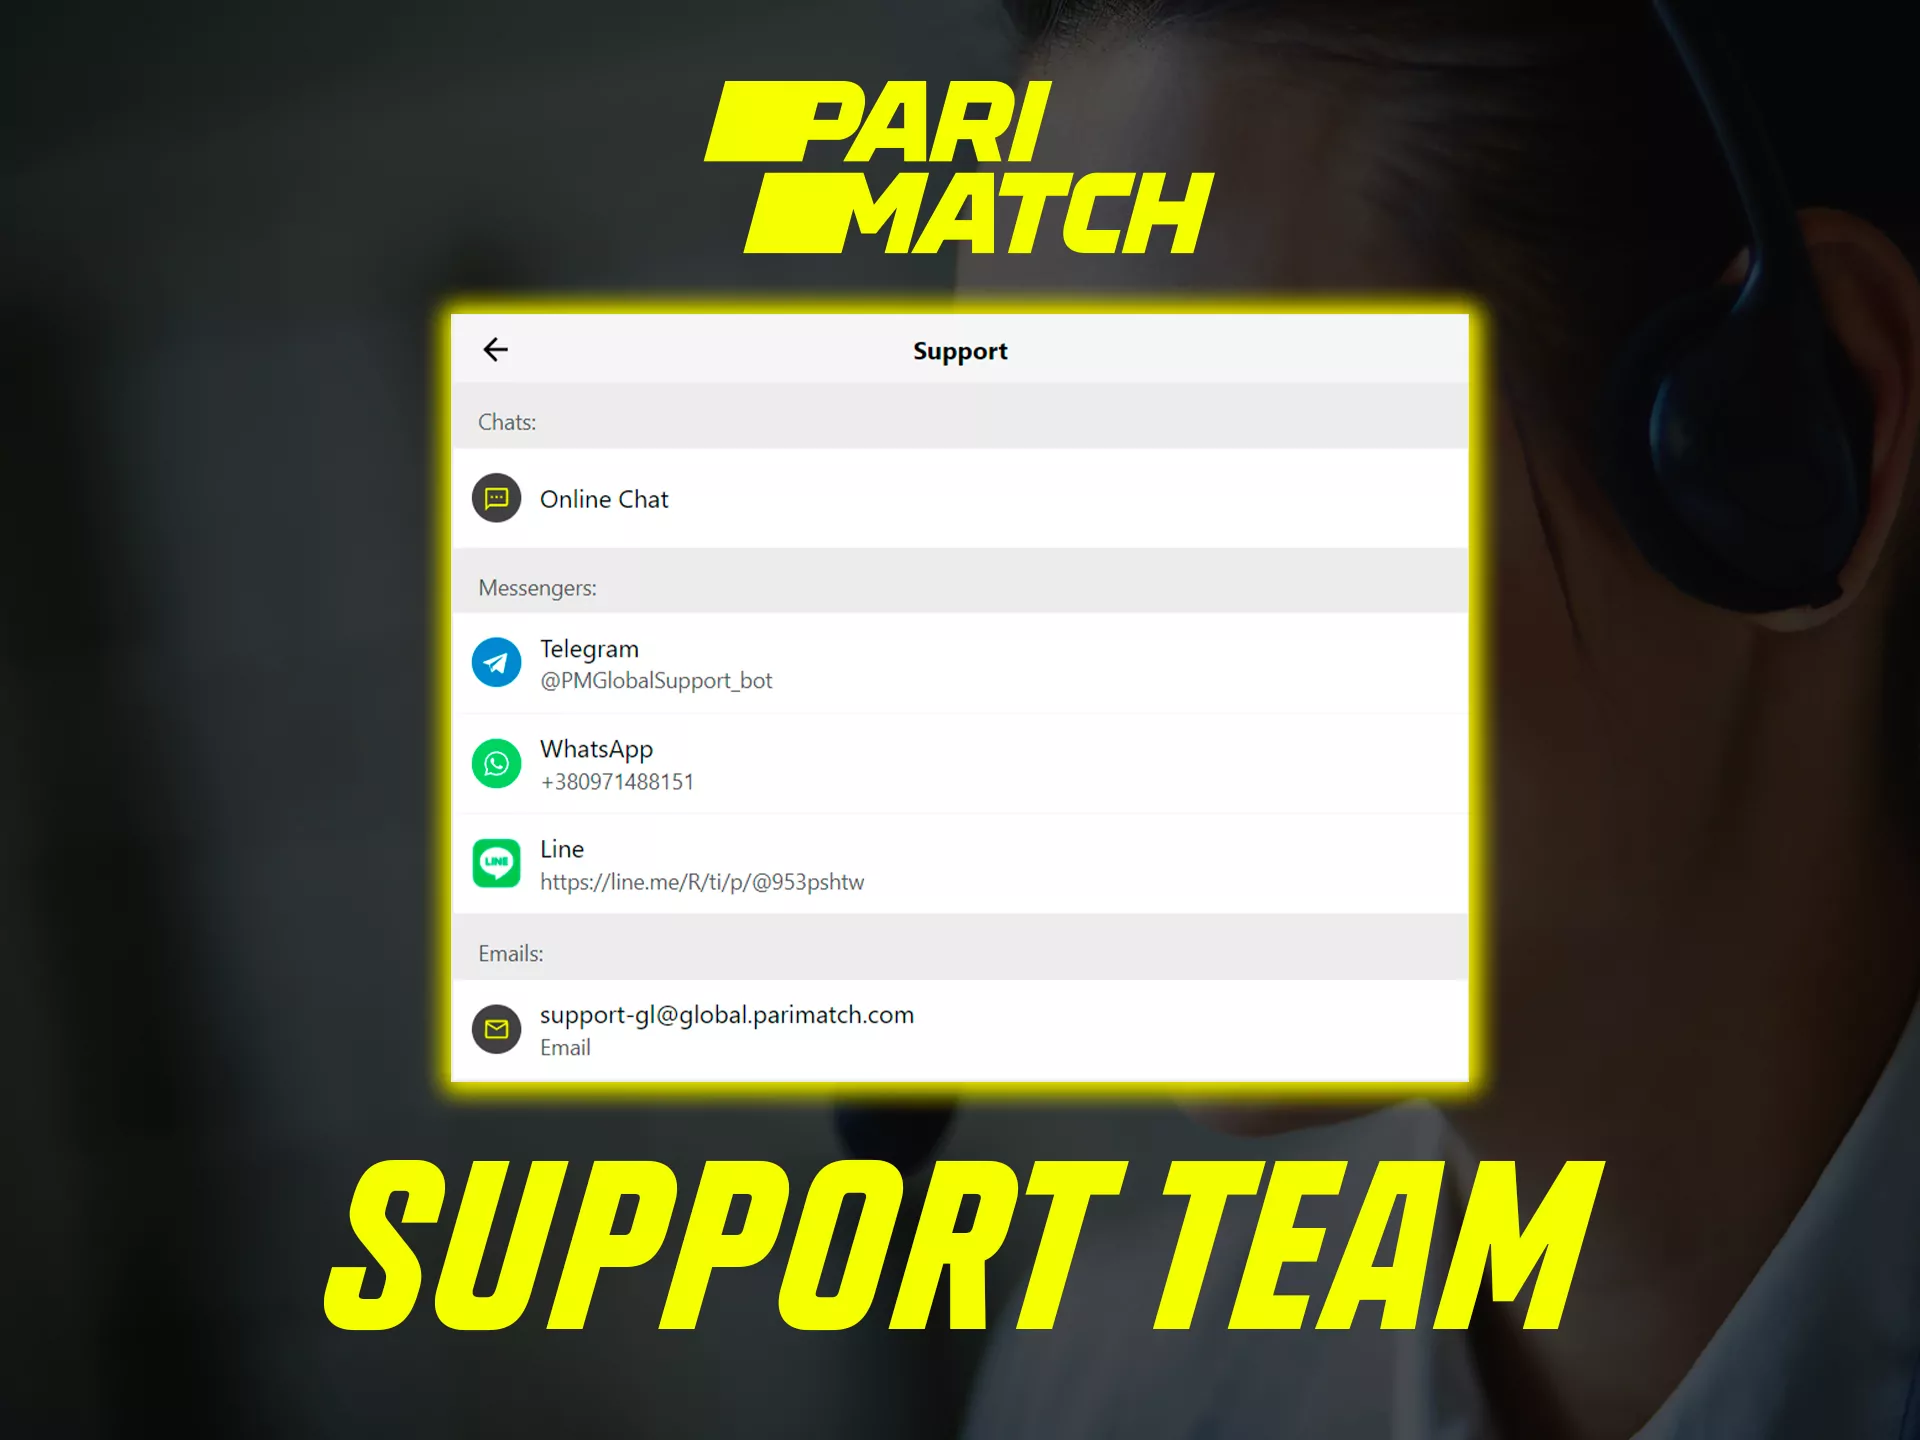 You can contact the support team 24/7.